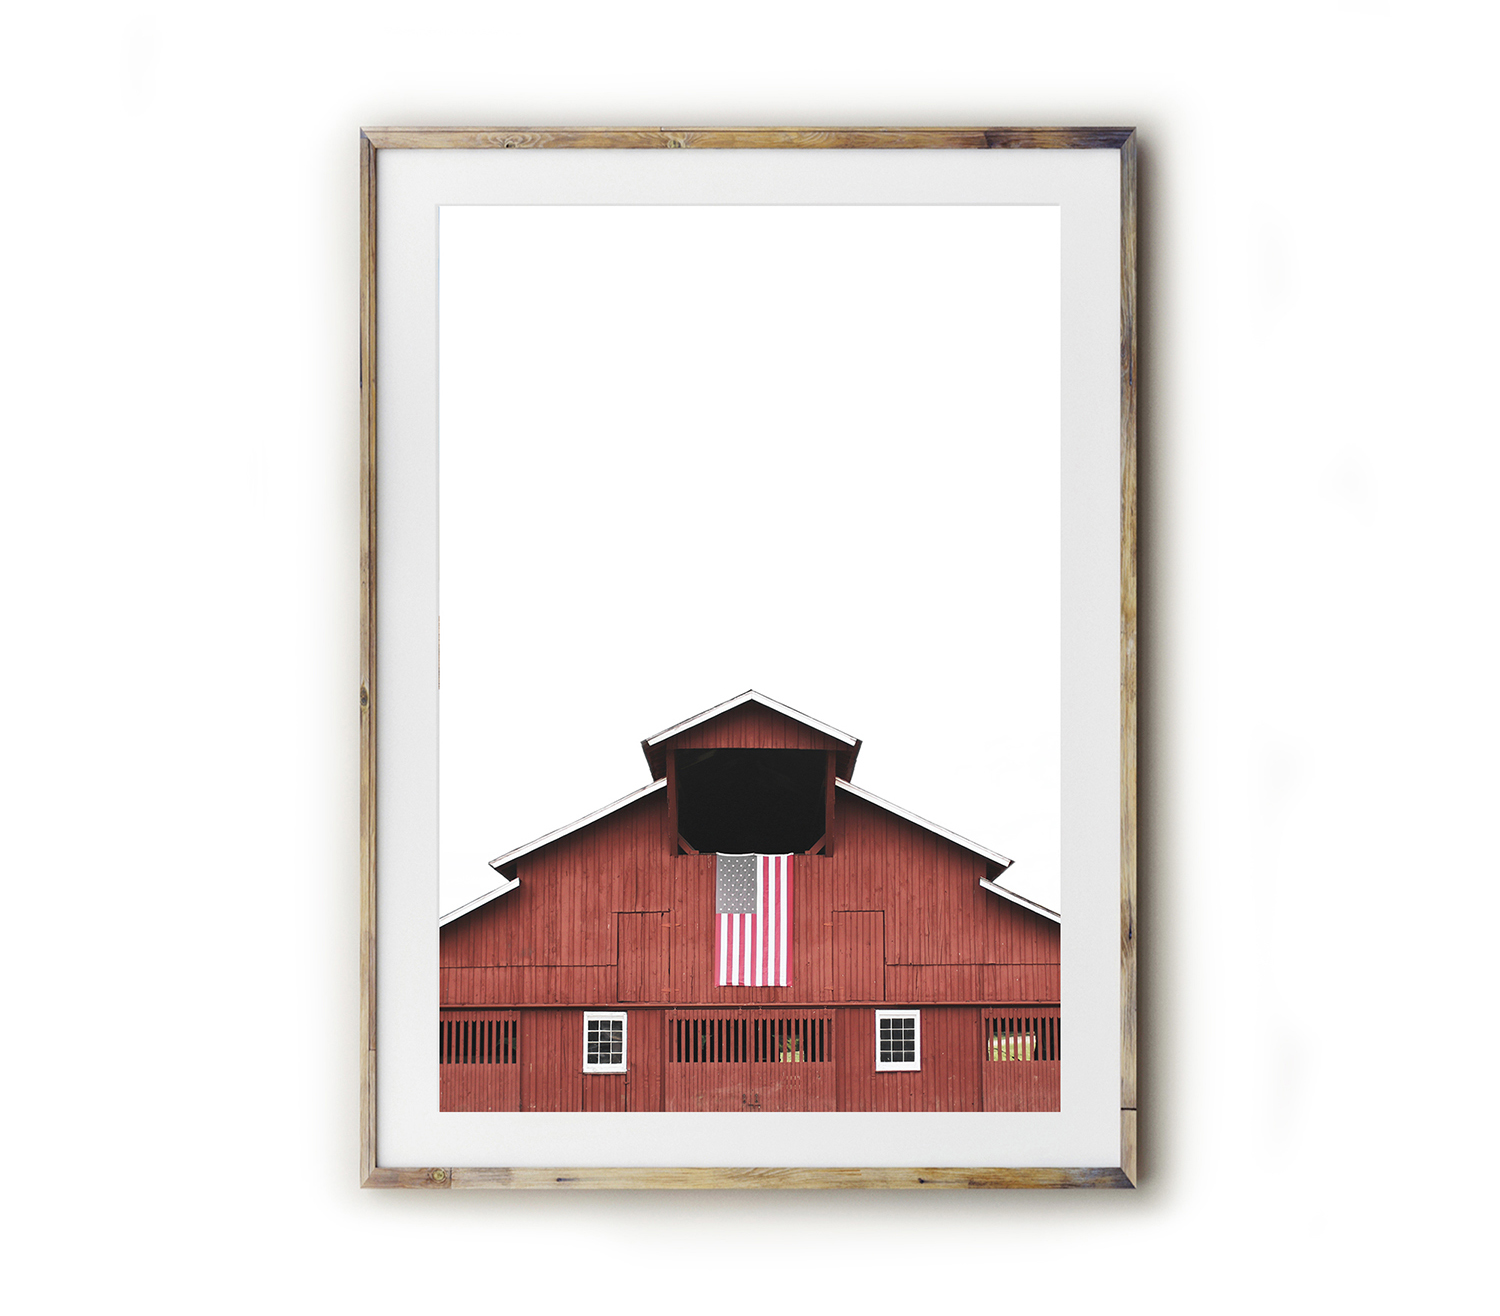 Fine art for the Southern home! Beautiful photography and typography prints created by Kara Layne now available to purchase from the Kara Layne Shop. Come and browse the collection and find something you love and enjoy it in your own home! #WallArtIdeas #ScenesOfTheSouth #SoutherLiving #ModernFarmhouseDecorIdeas #FineArtPrints #Barn #AmericanFlag